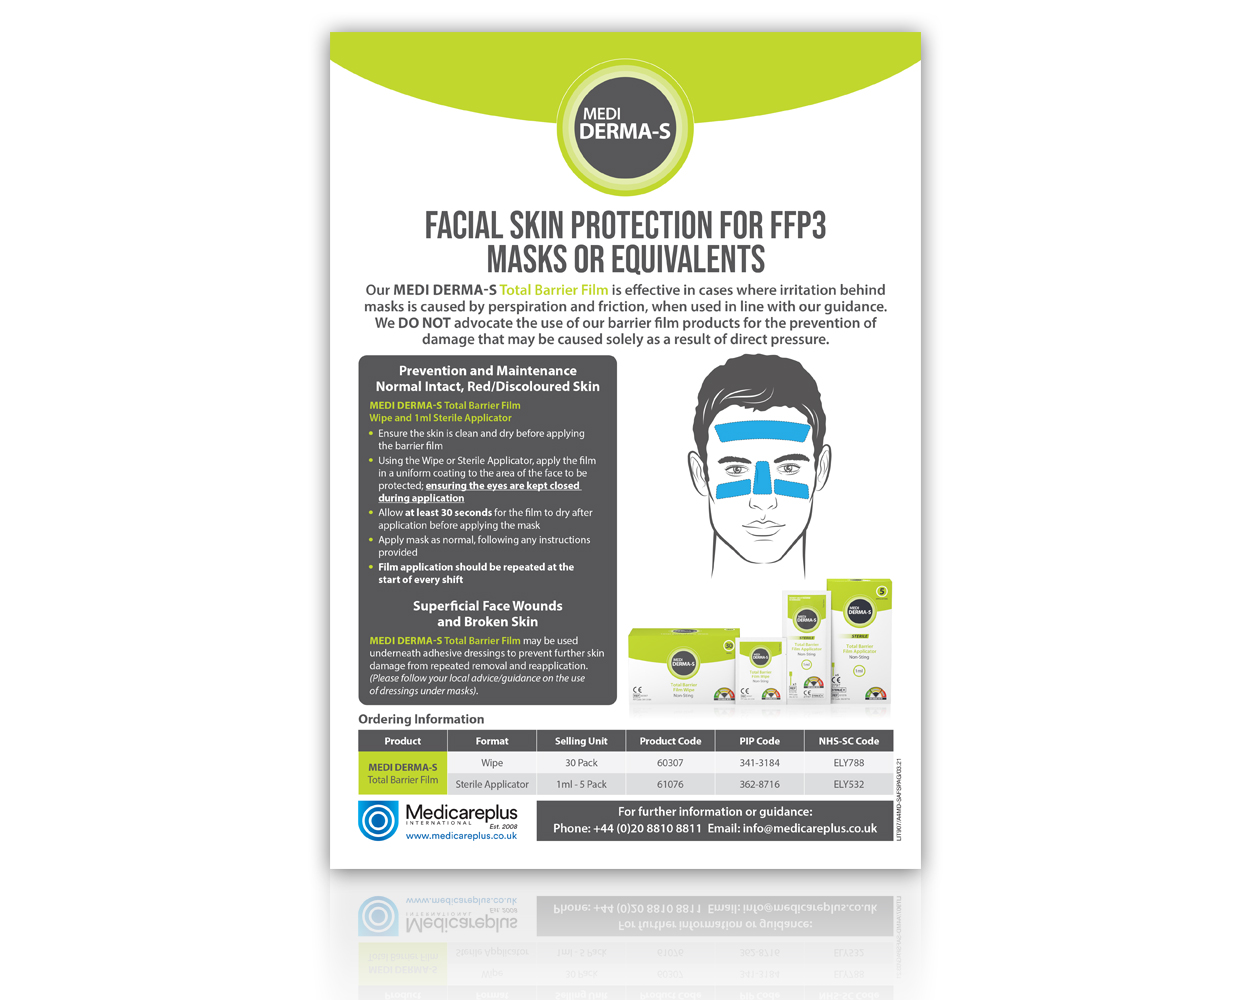 Facial Skin Protection For FFP3 Masks and Equivalents